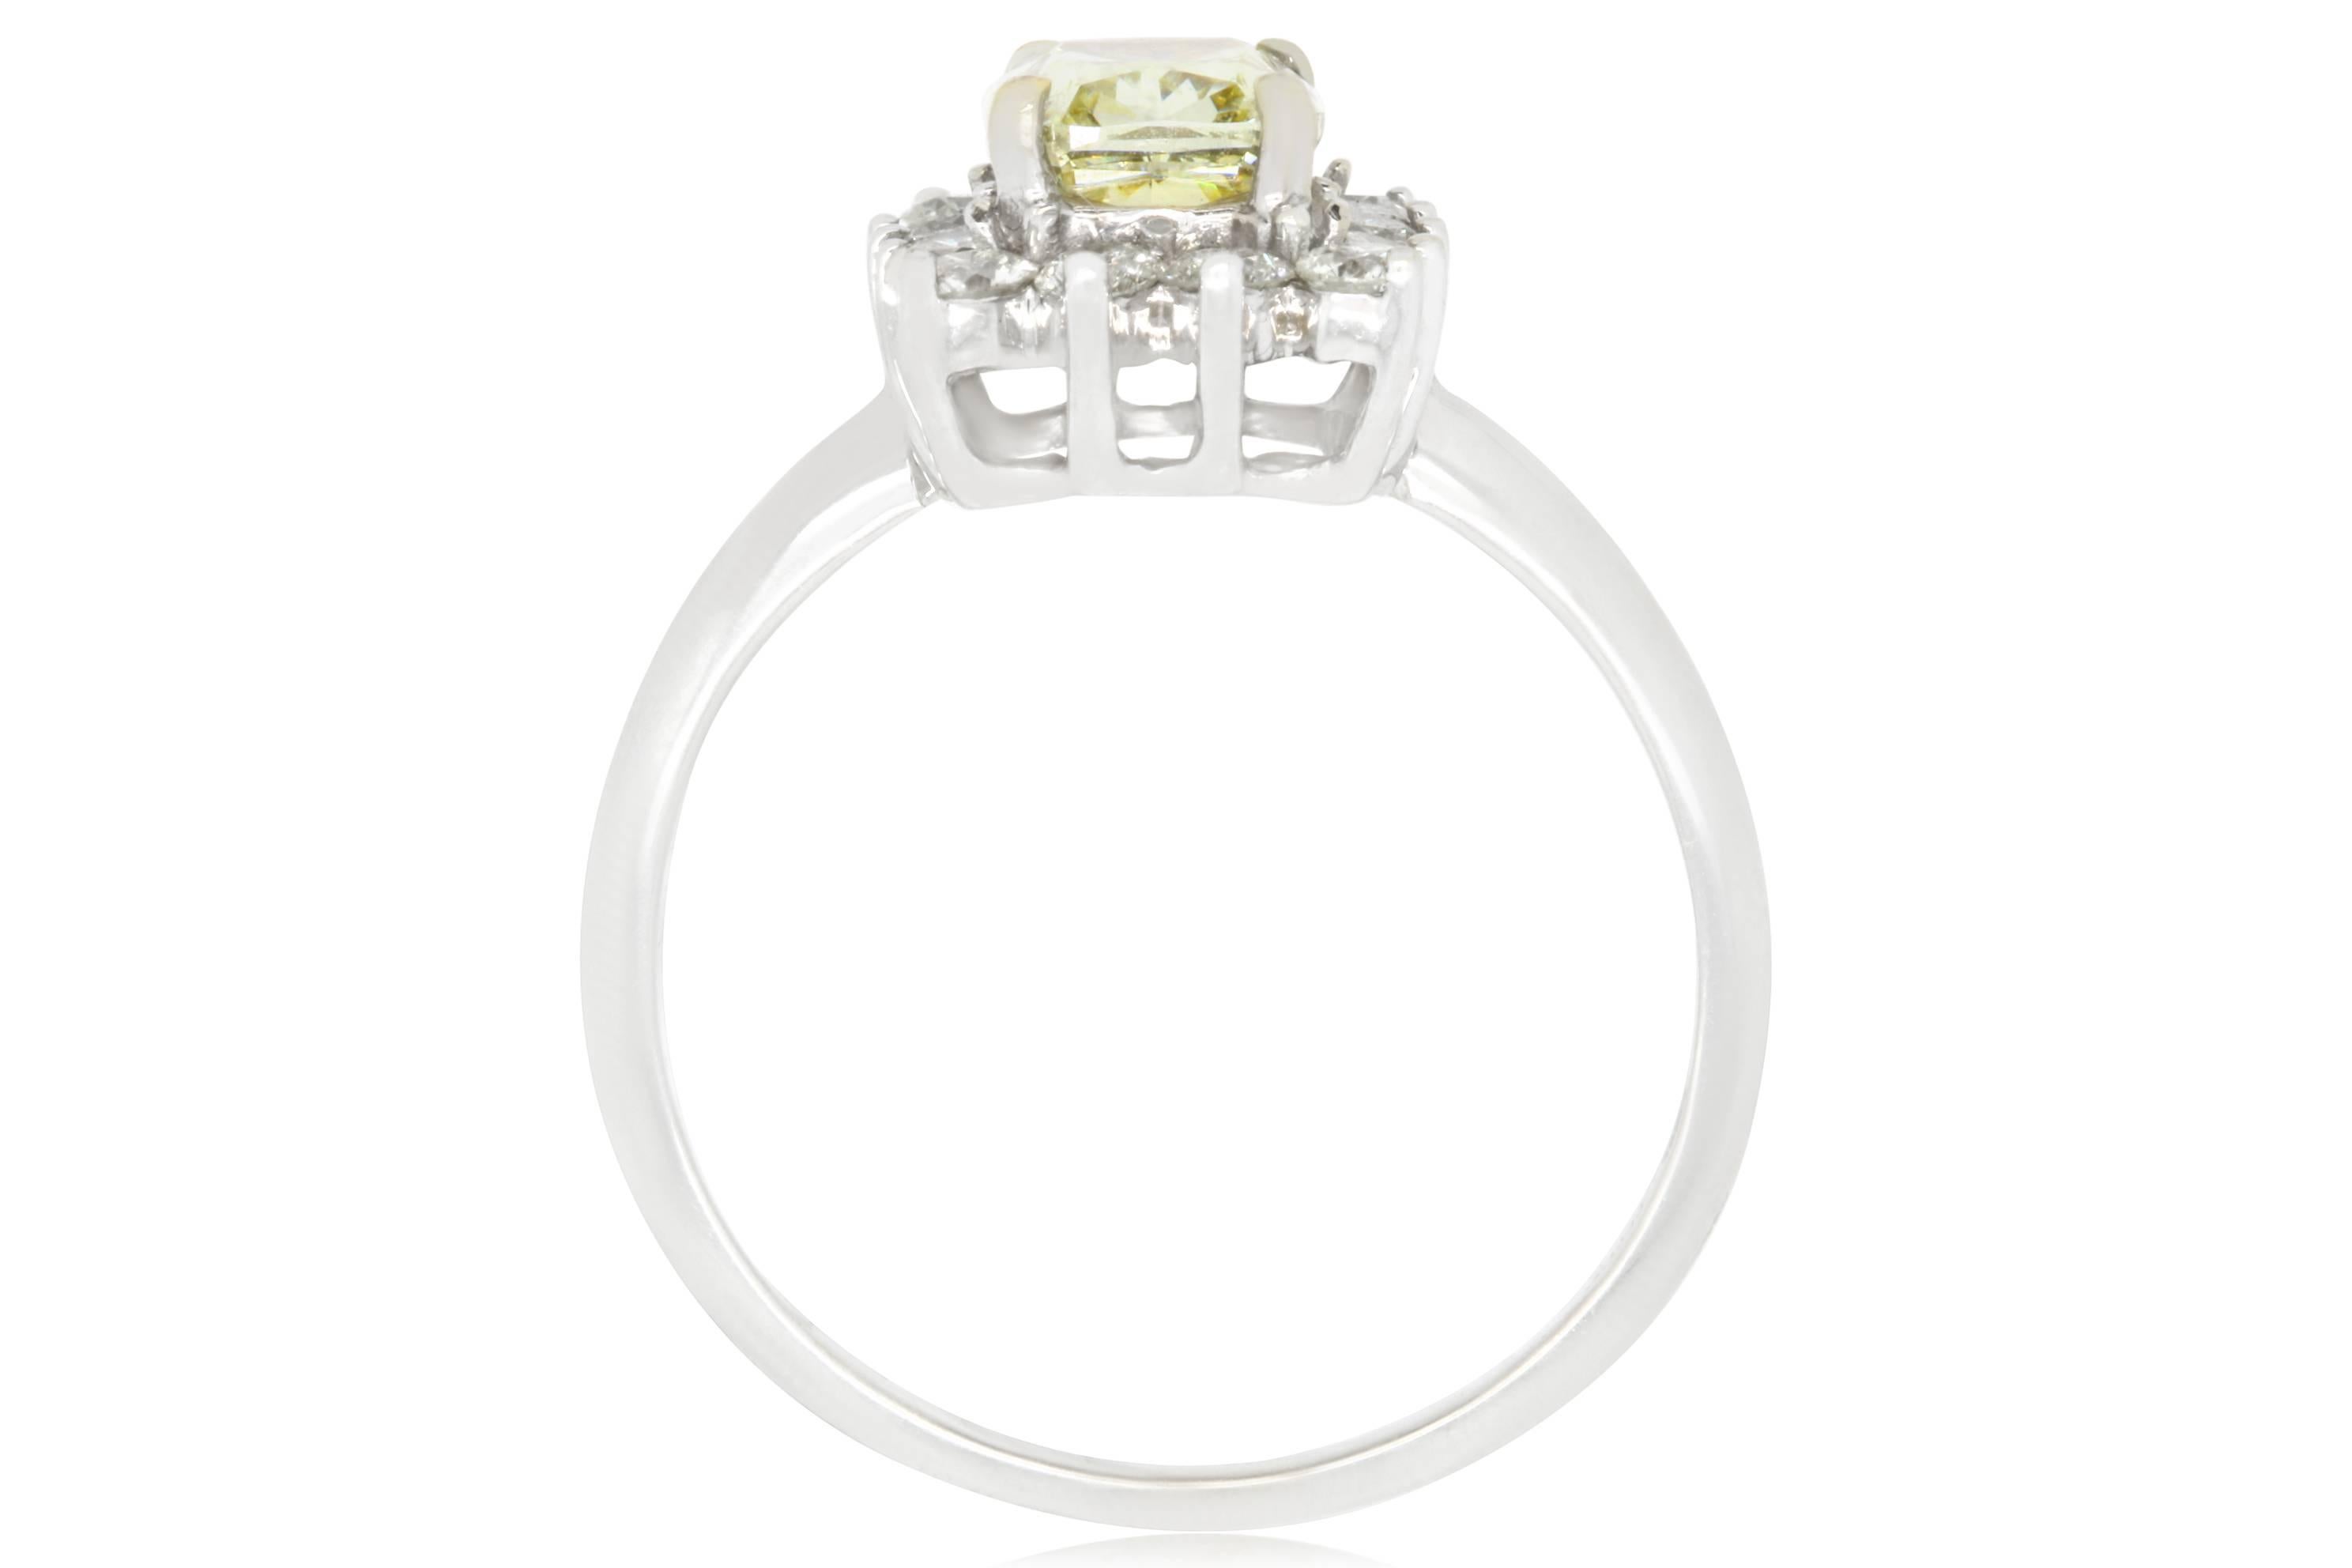 Material: 18K White Gold 
Center Stone Details: 1 Cushion Cut Yellow Diamond at 1.51 Carats 
Stone Details: 14 Round White Diamonds at 0.63 Carats. Clarity: VS-SI  / Color: H-I
Ring Size: Size 7.25 (can be sized)

Fine one-of-a kind craftsmanship